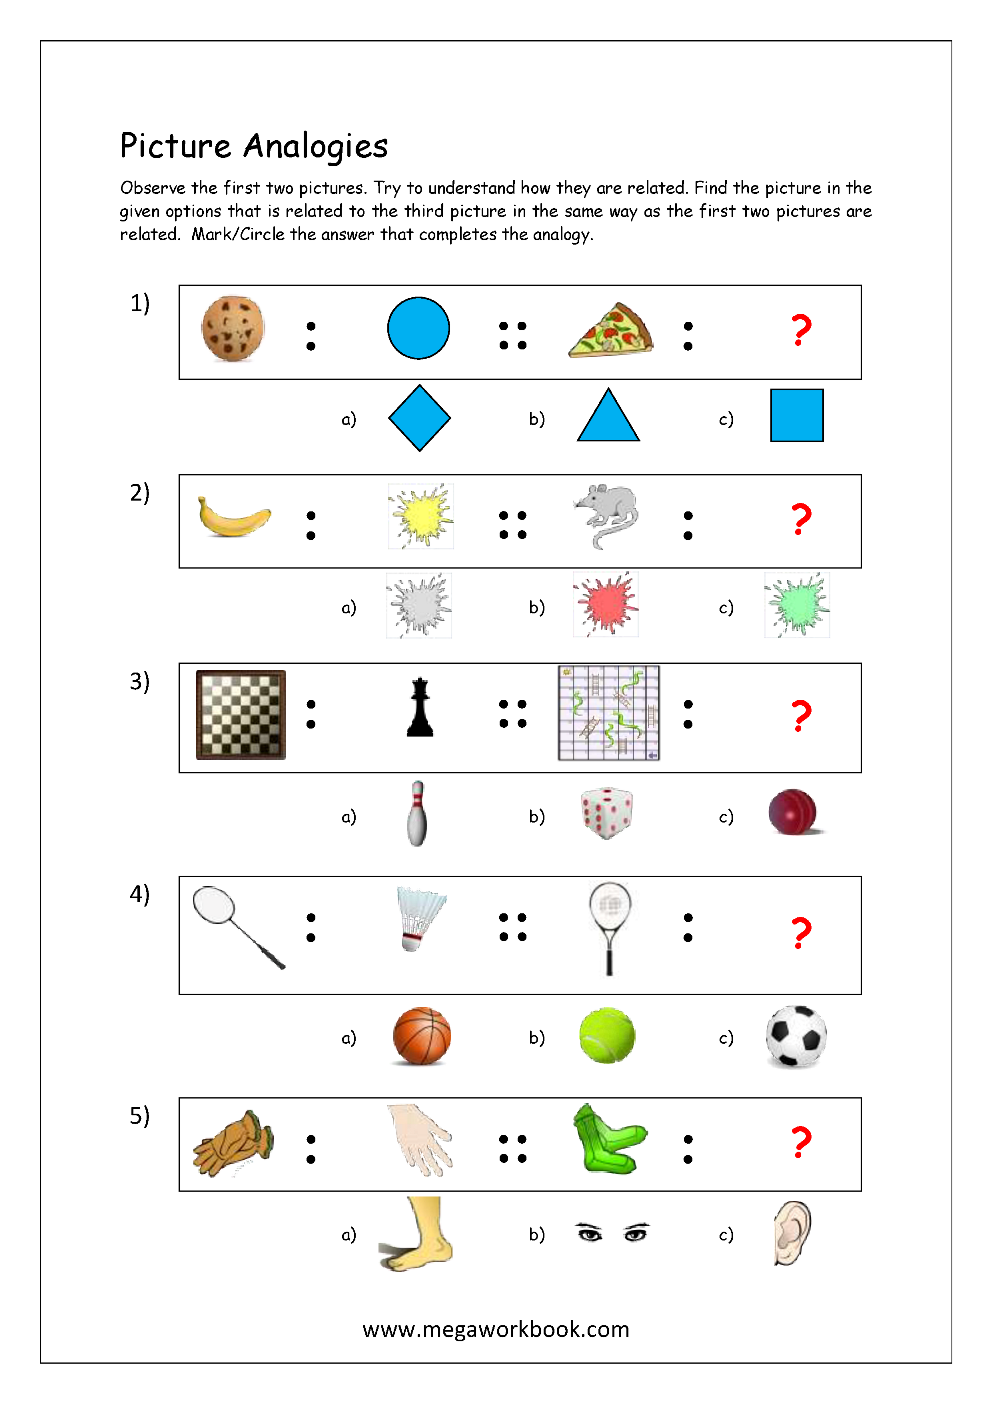 Free Printable Picture Analogy Worksheets - Logical